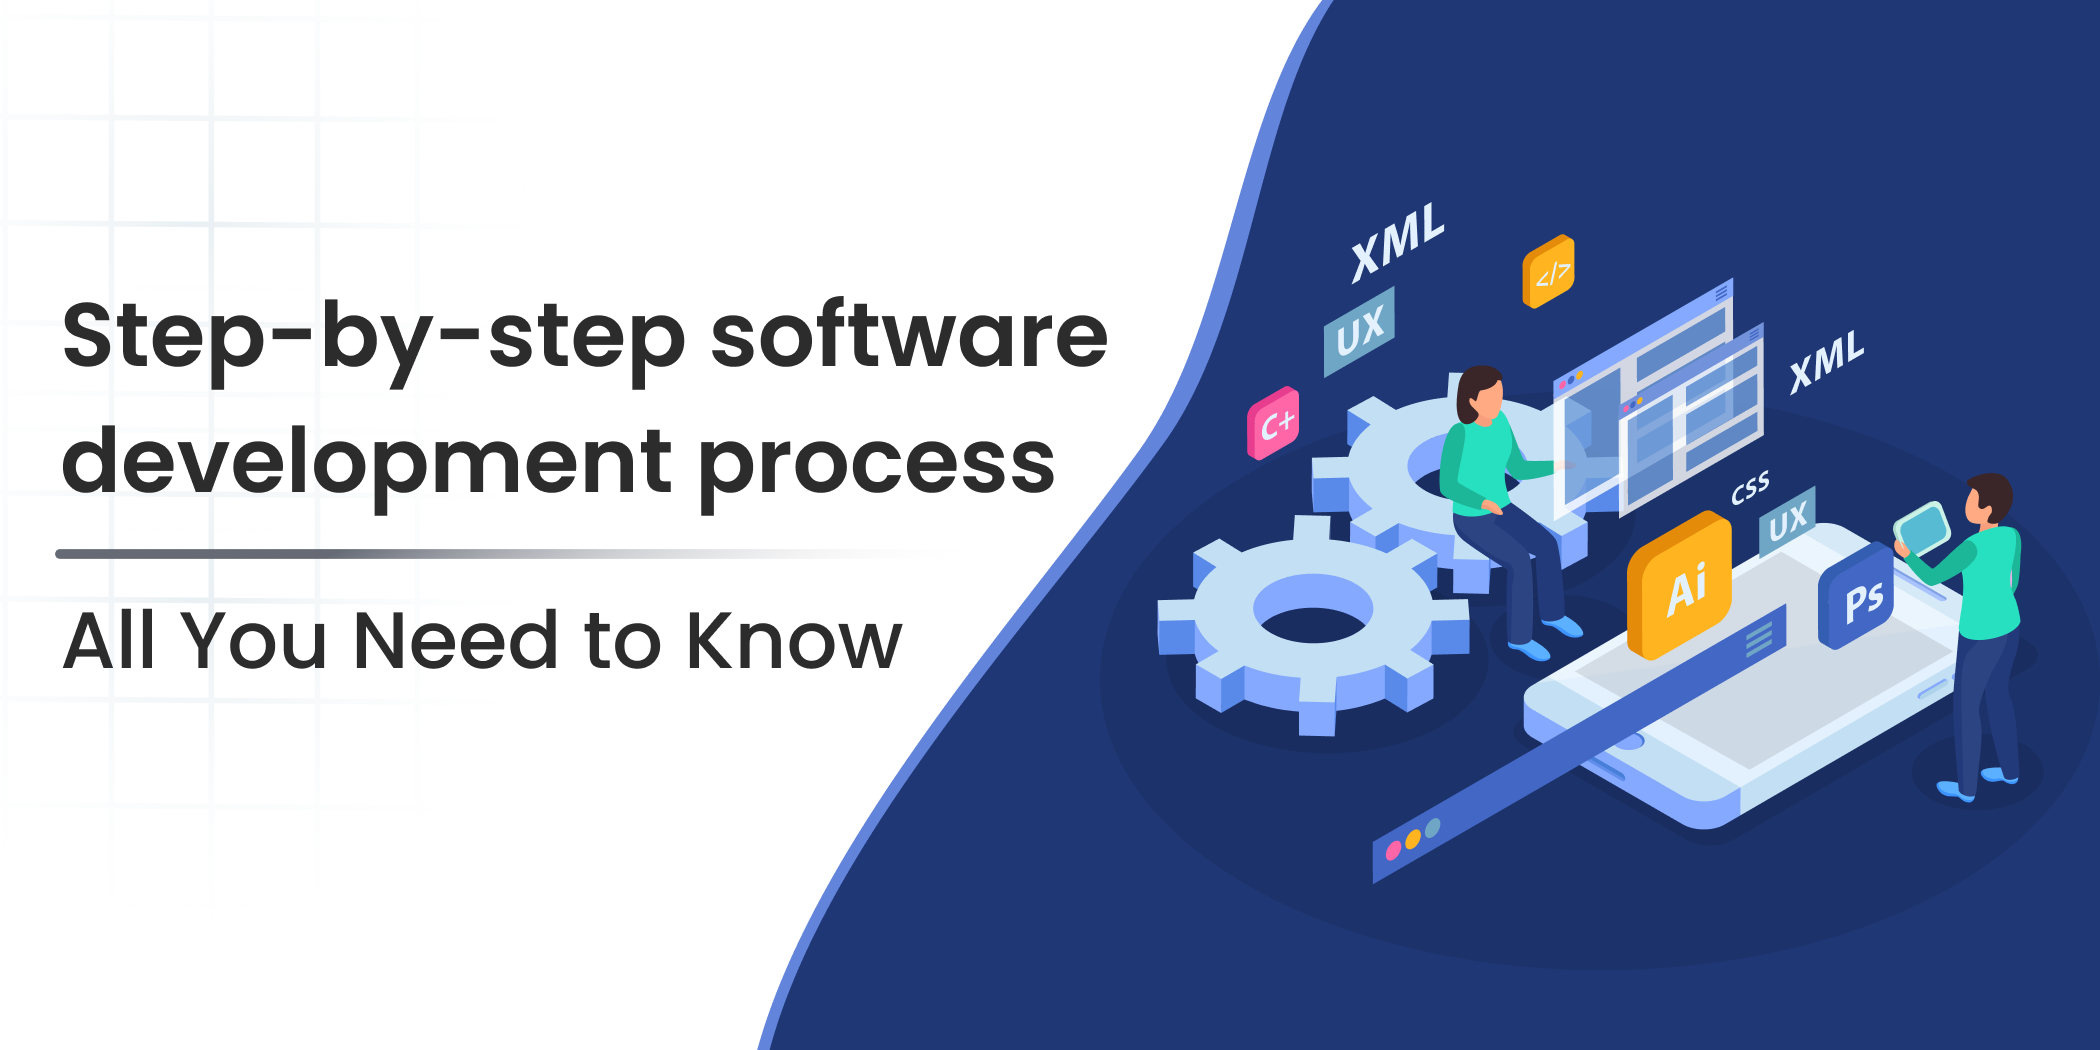 Step-by-step software development process: All You Need to Know